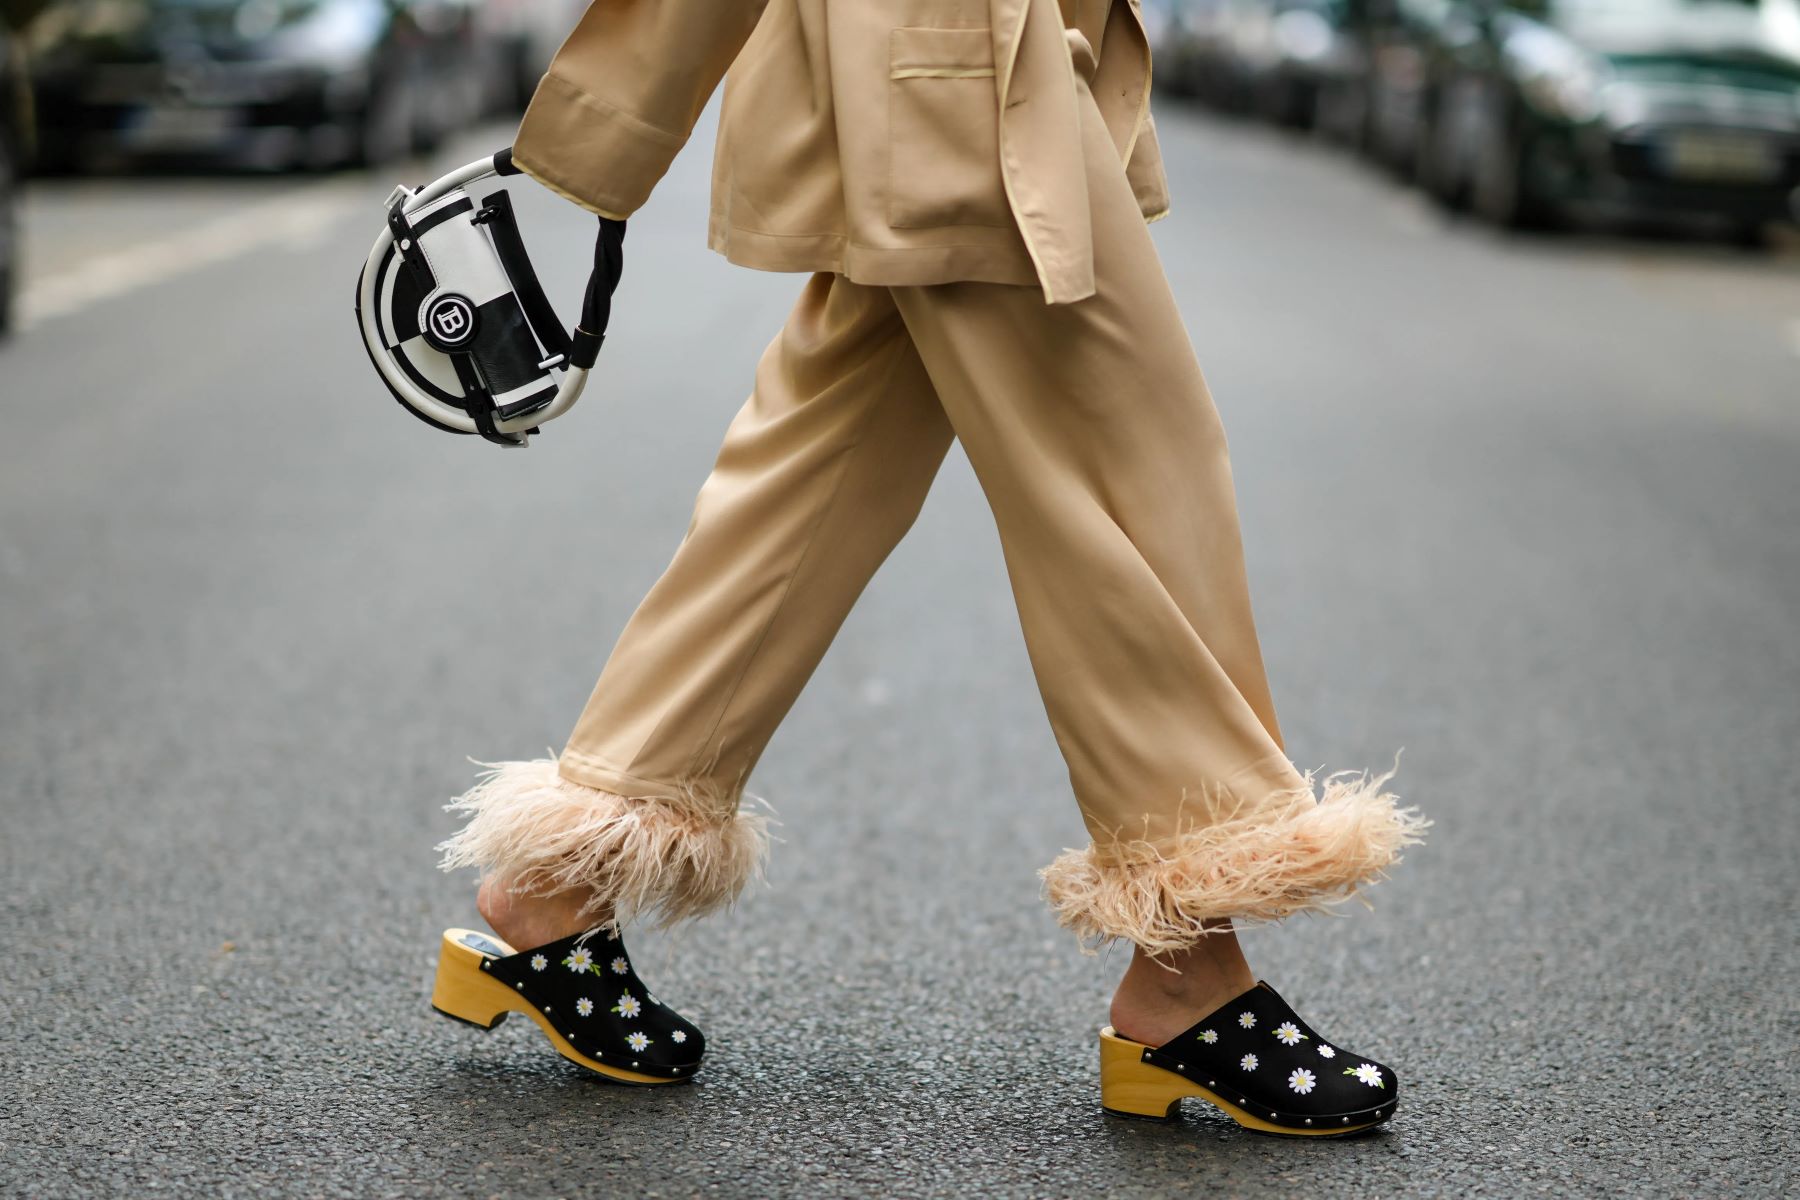 The Ultimate Guide To Putting On Clogs - You Won't Believe How Easy It Is!